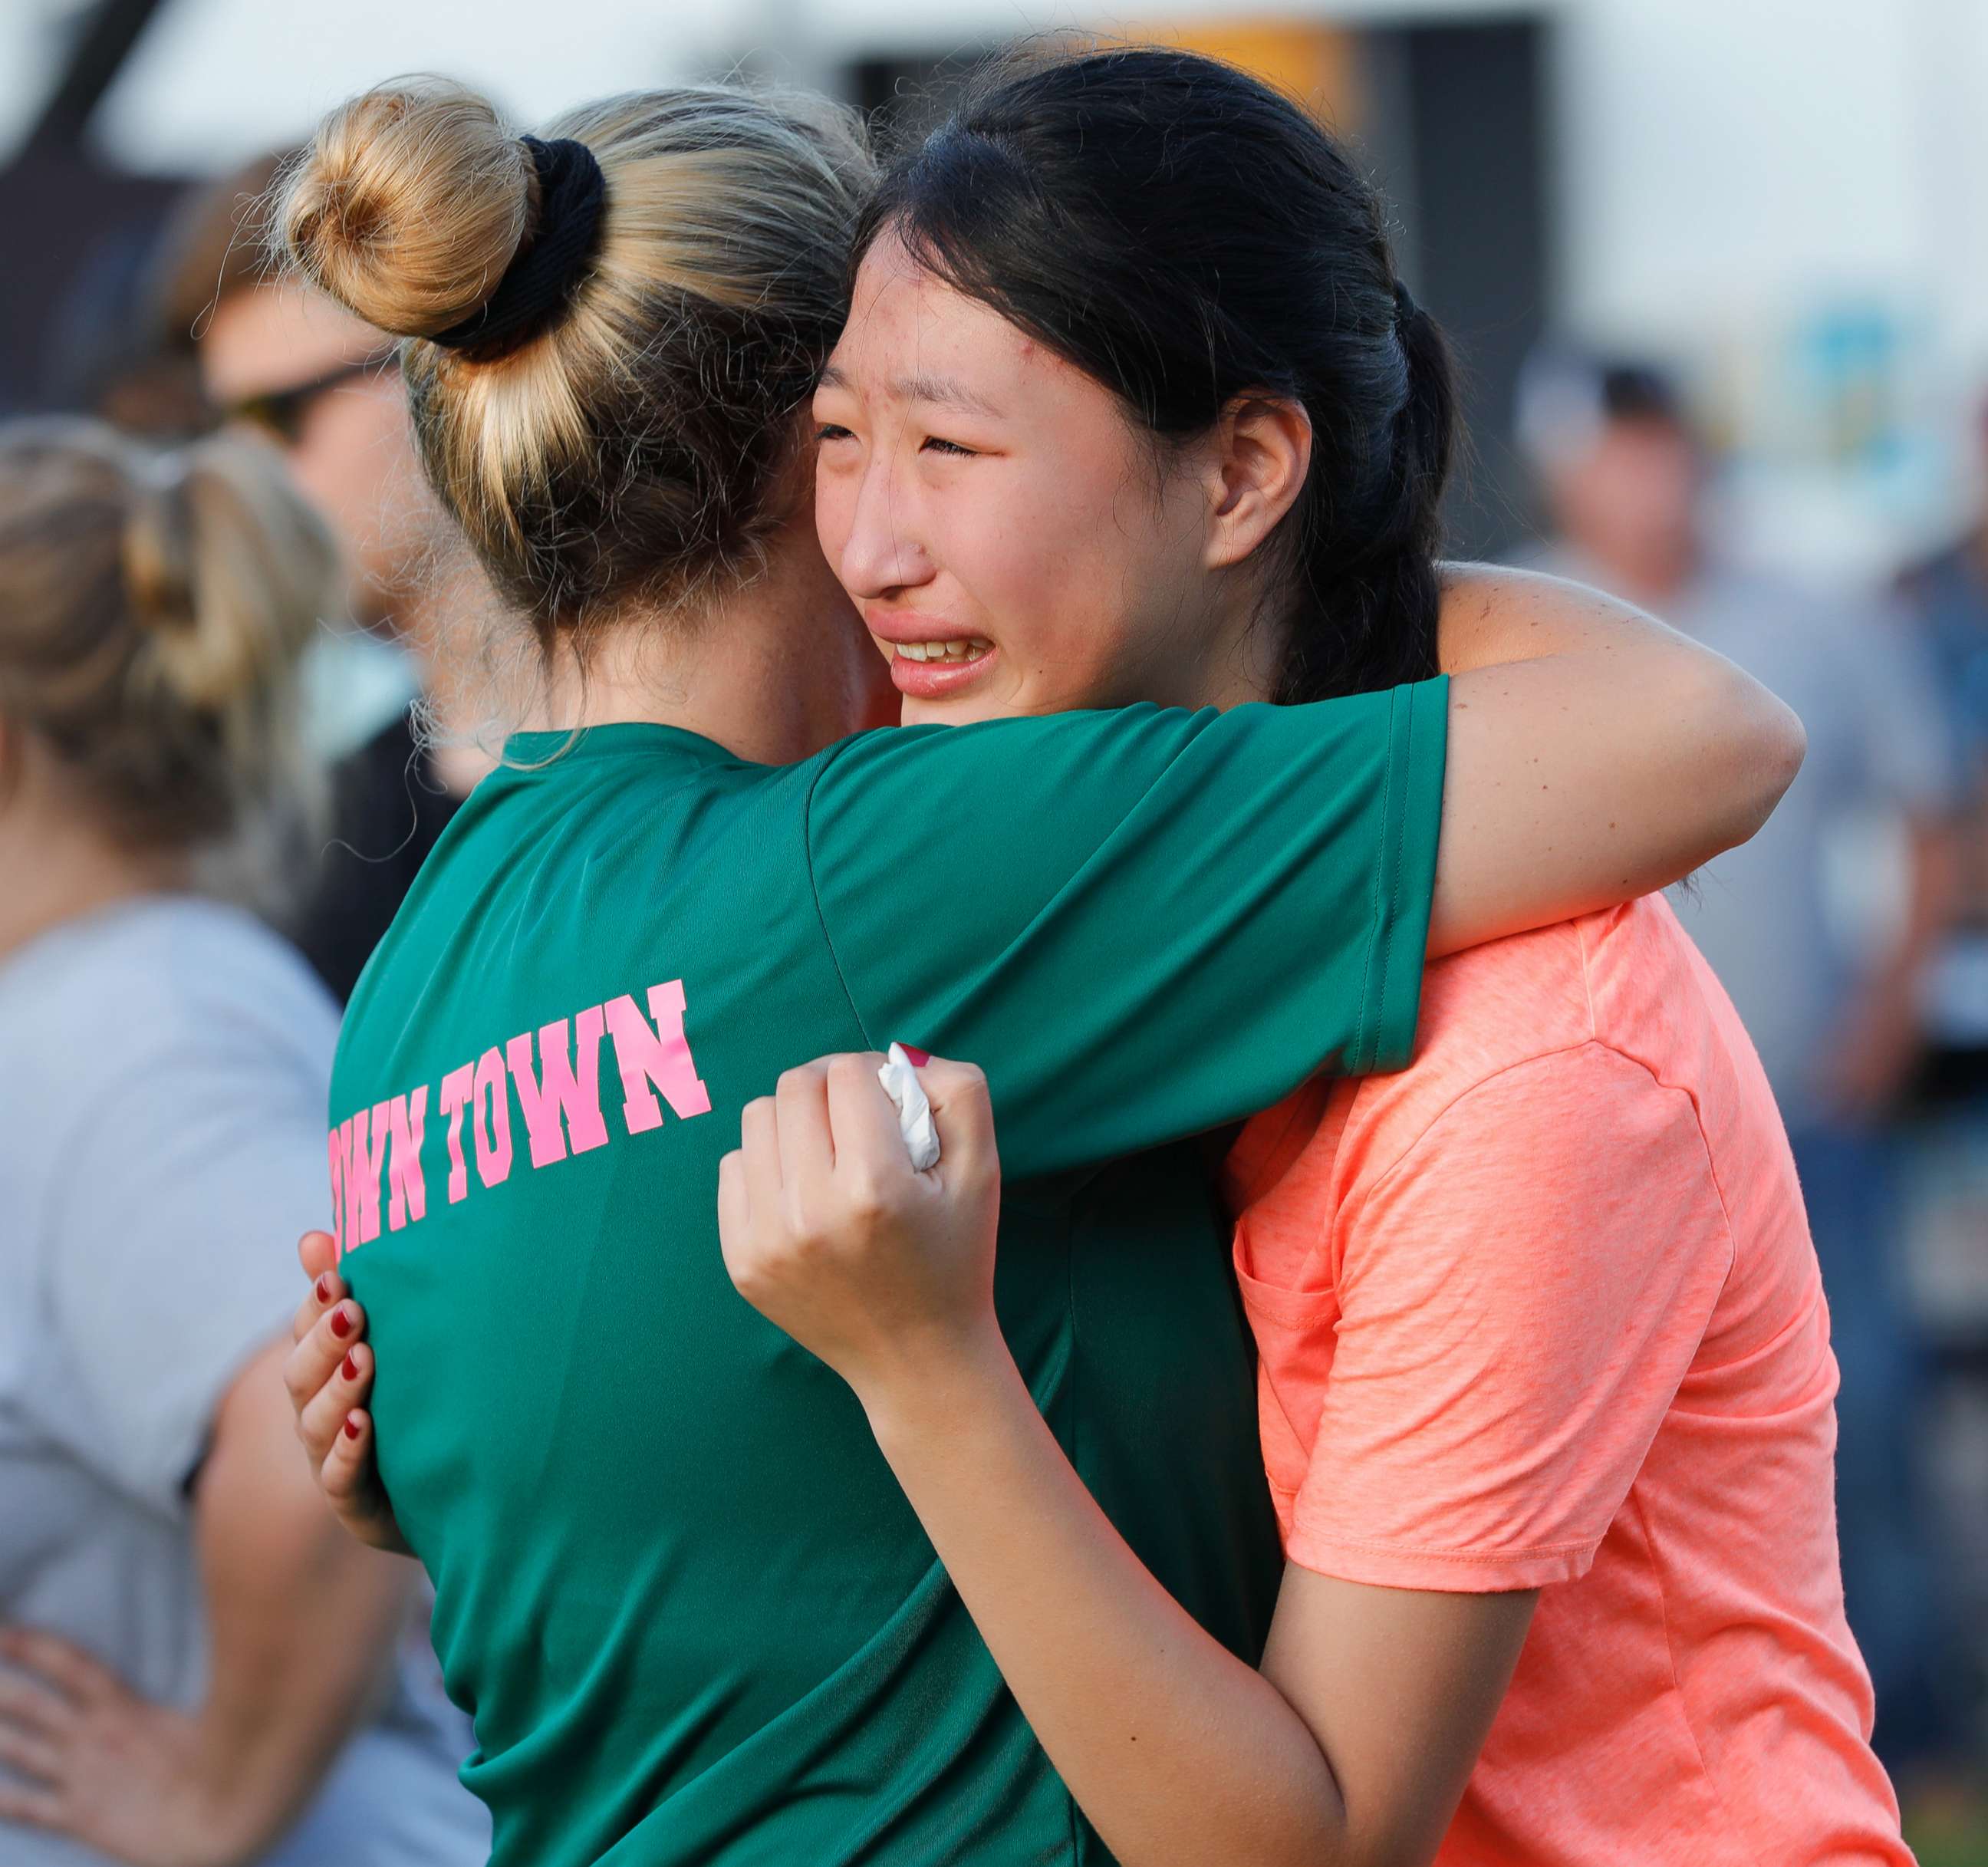 PHOTO: Friends and family attend a vigil held at the First Bank in Santa Fe for the victims of a shooting incident at Santa Fe High School, May 18, 2018 in Santa Fe, Texas.